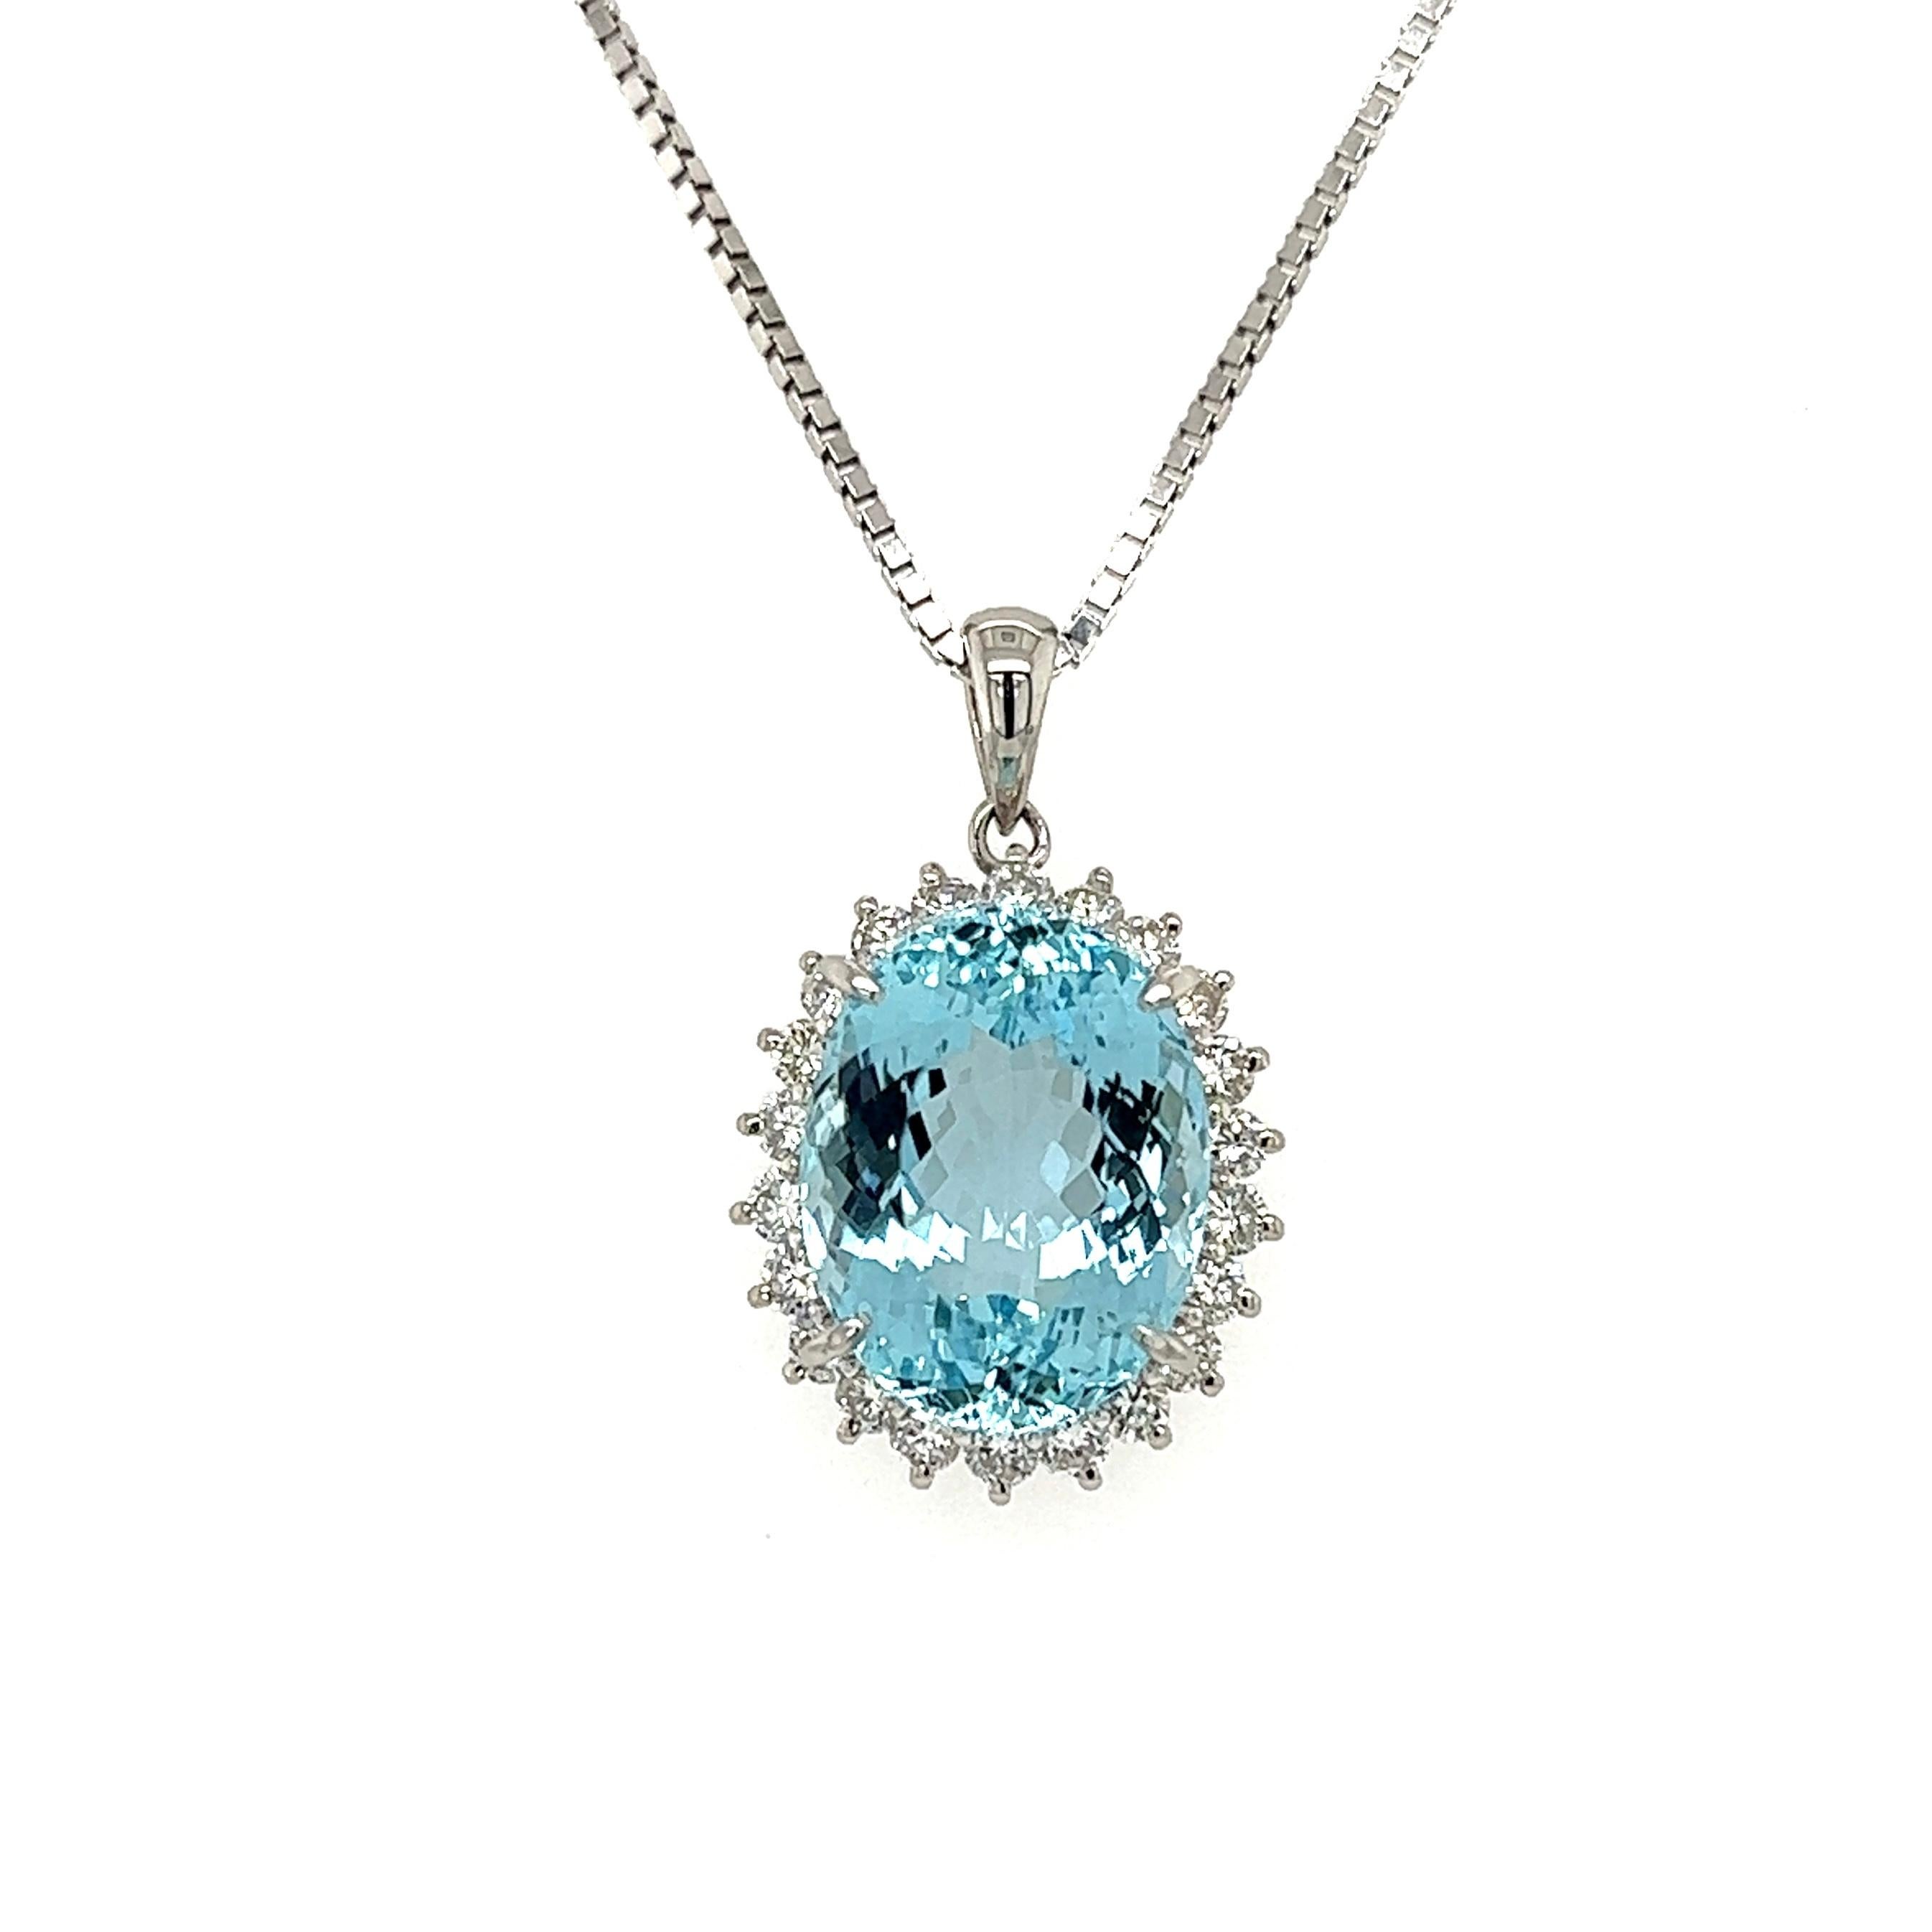 Simply Beautiful! Finely detailed Aquamarine and Diamond Platinum Halo Pendant Necklace. Centering a Hand set 8.10 Carat Aquamarine, surrounded by Diamonds weighing approx. 0.62tcw. Pendant measures approx. 0.94” l x 0.58” w x 0.32” h. Suspended